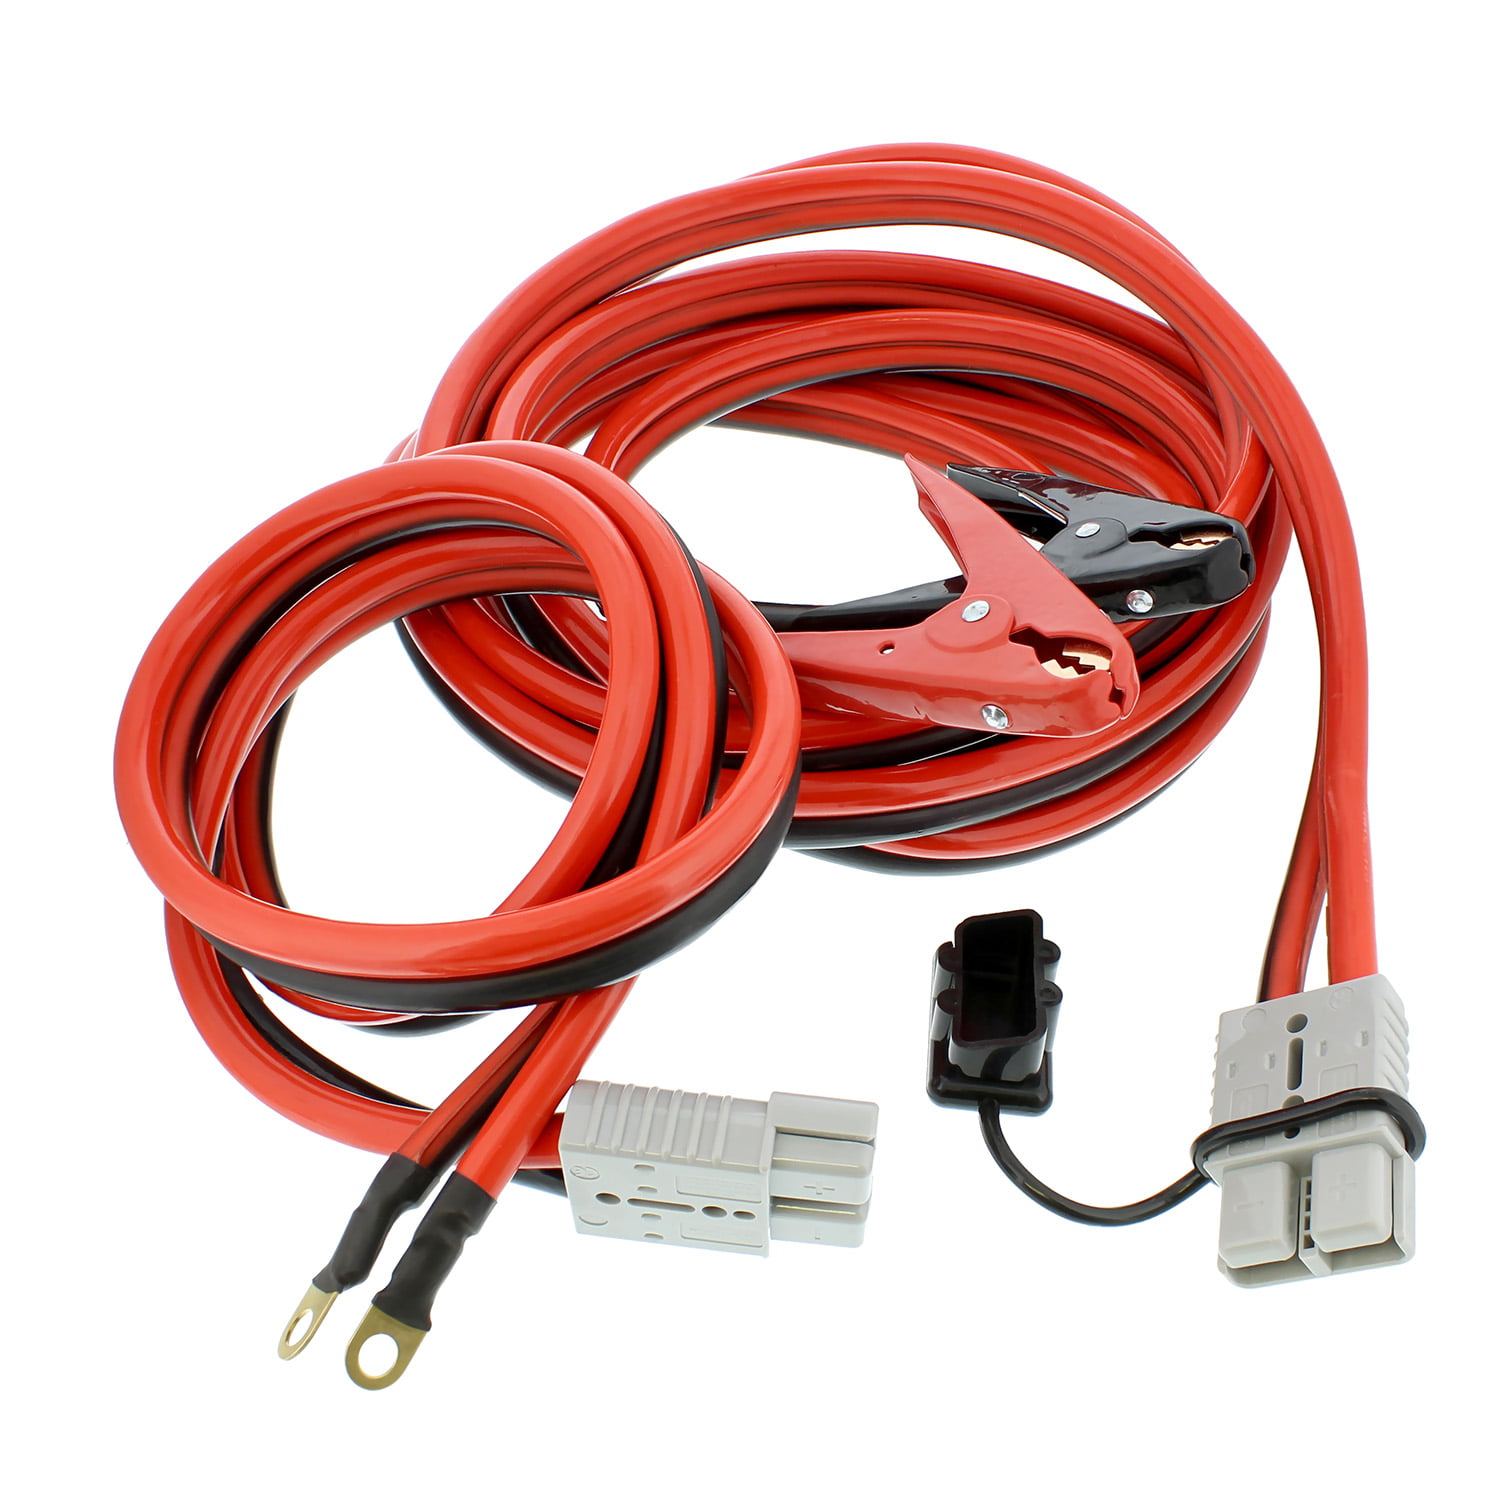 Quick Connect Disconnect Jumper Cables Heavy Duty Battery Booster 1-Gauge 30 Ft 